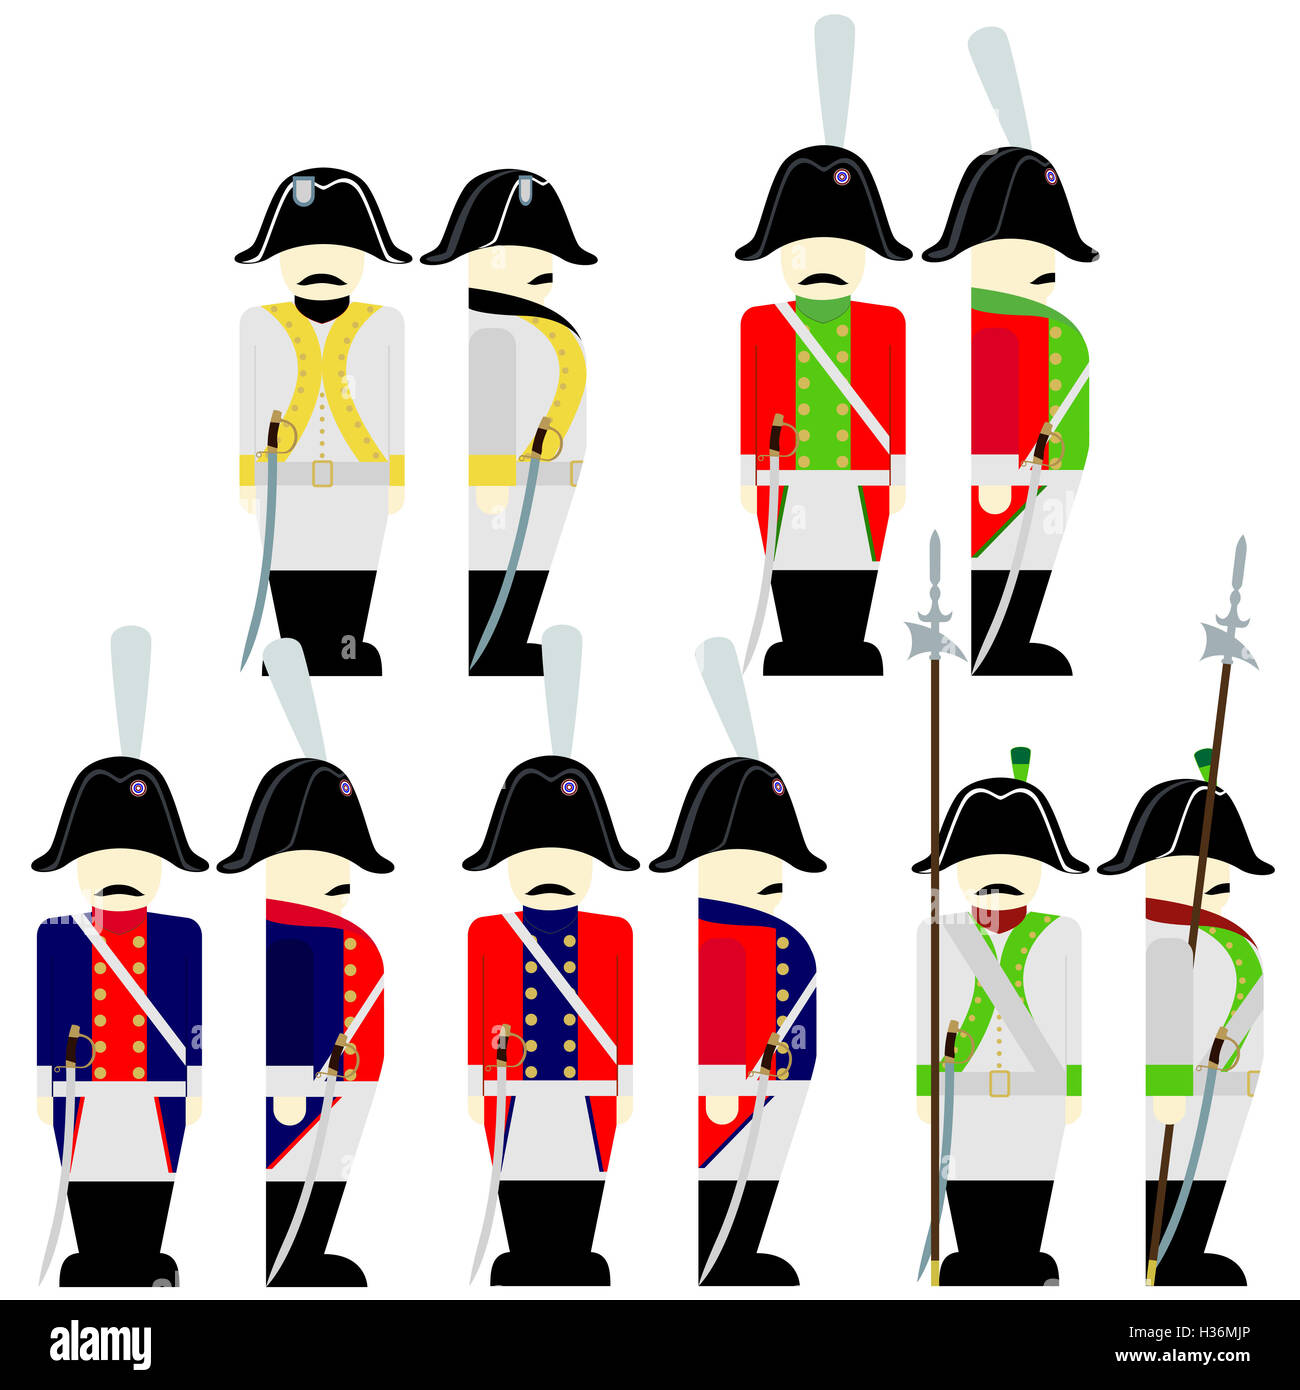 Soldiers of the army of Saxony in uniforms and weapons were used in the 1812 war. The illustration on a white background. Stock Photo